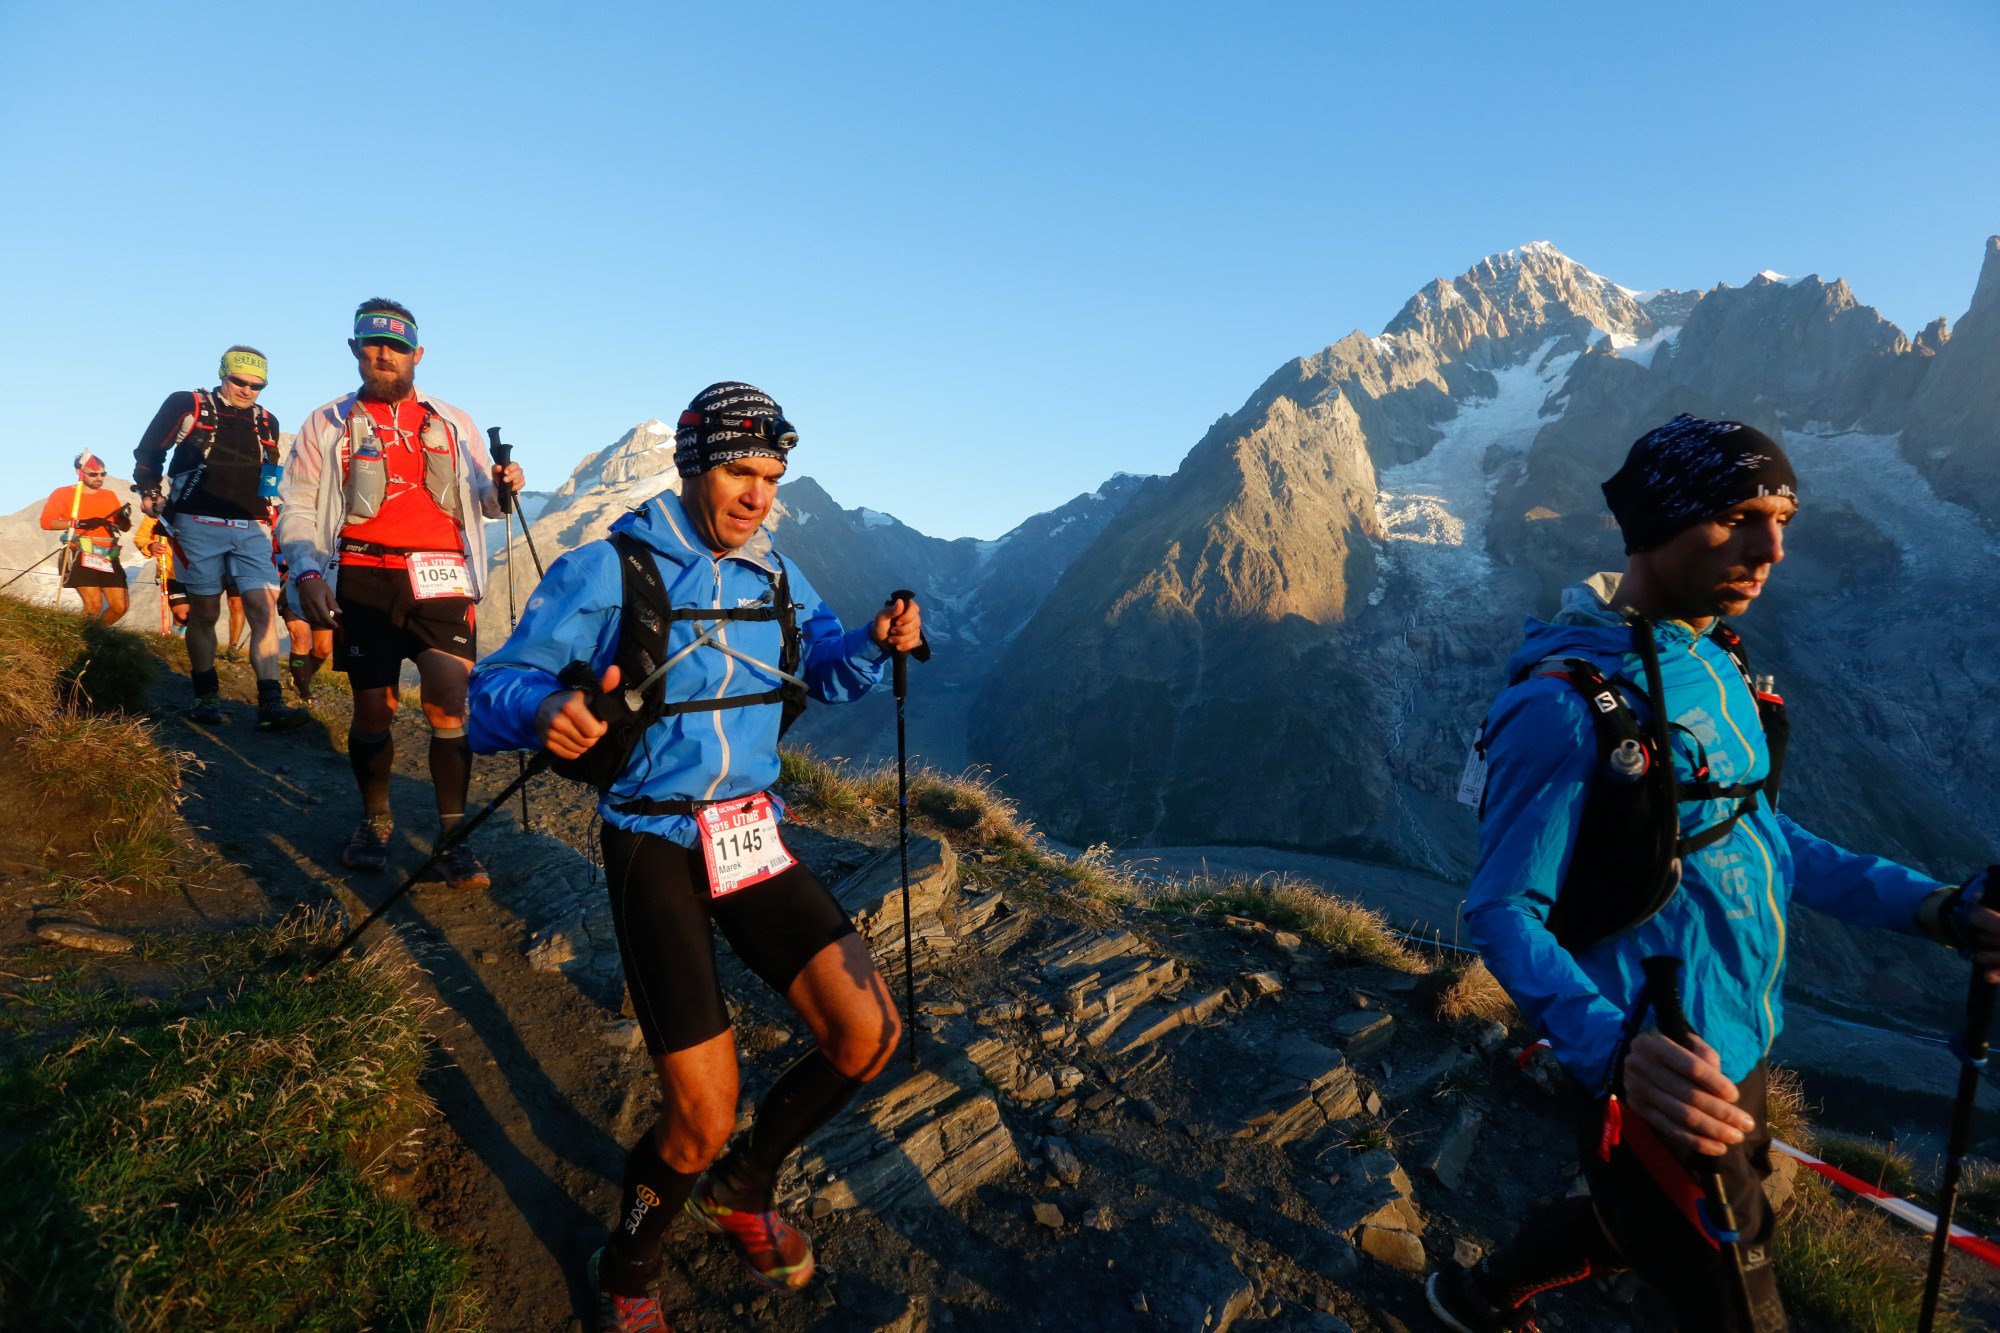 UTMB book reveals the history of the famous event, delving into